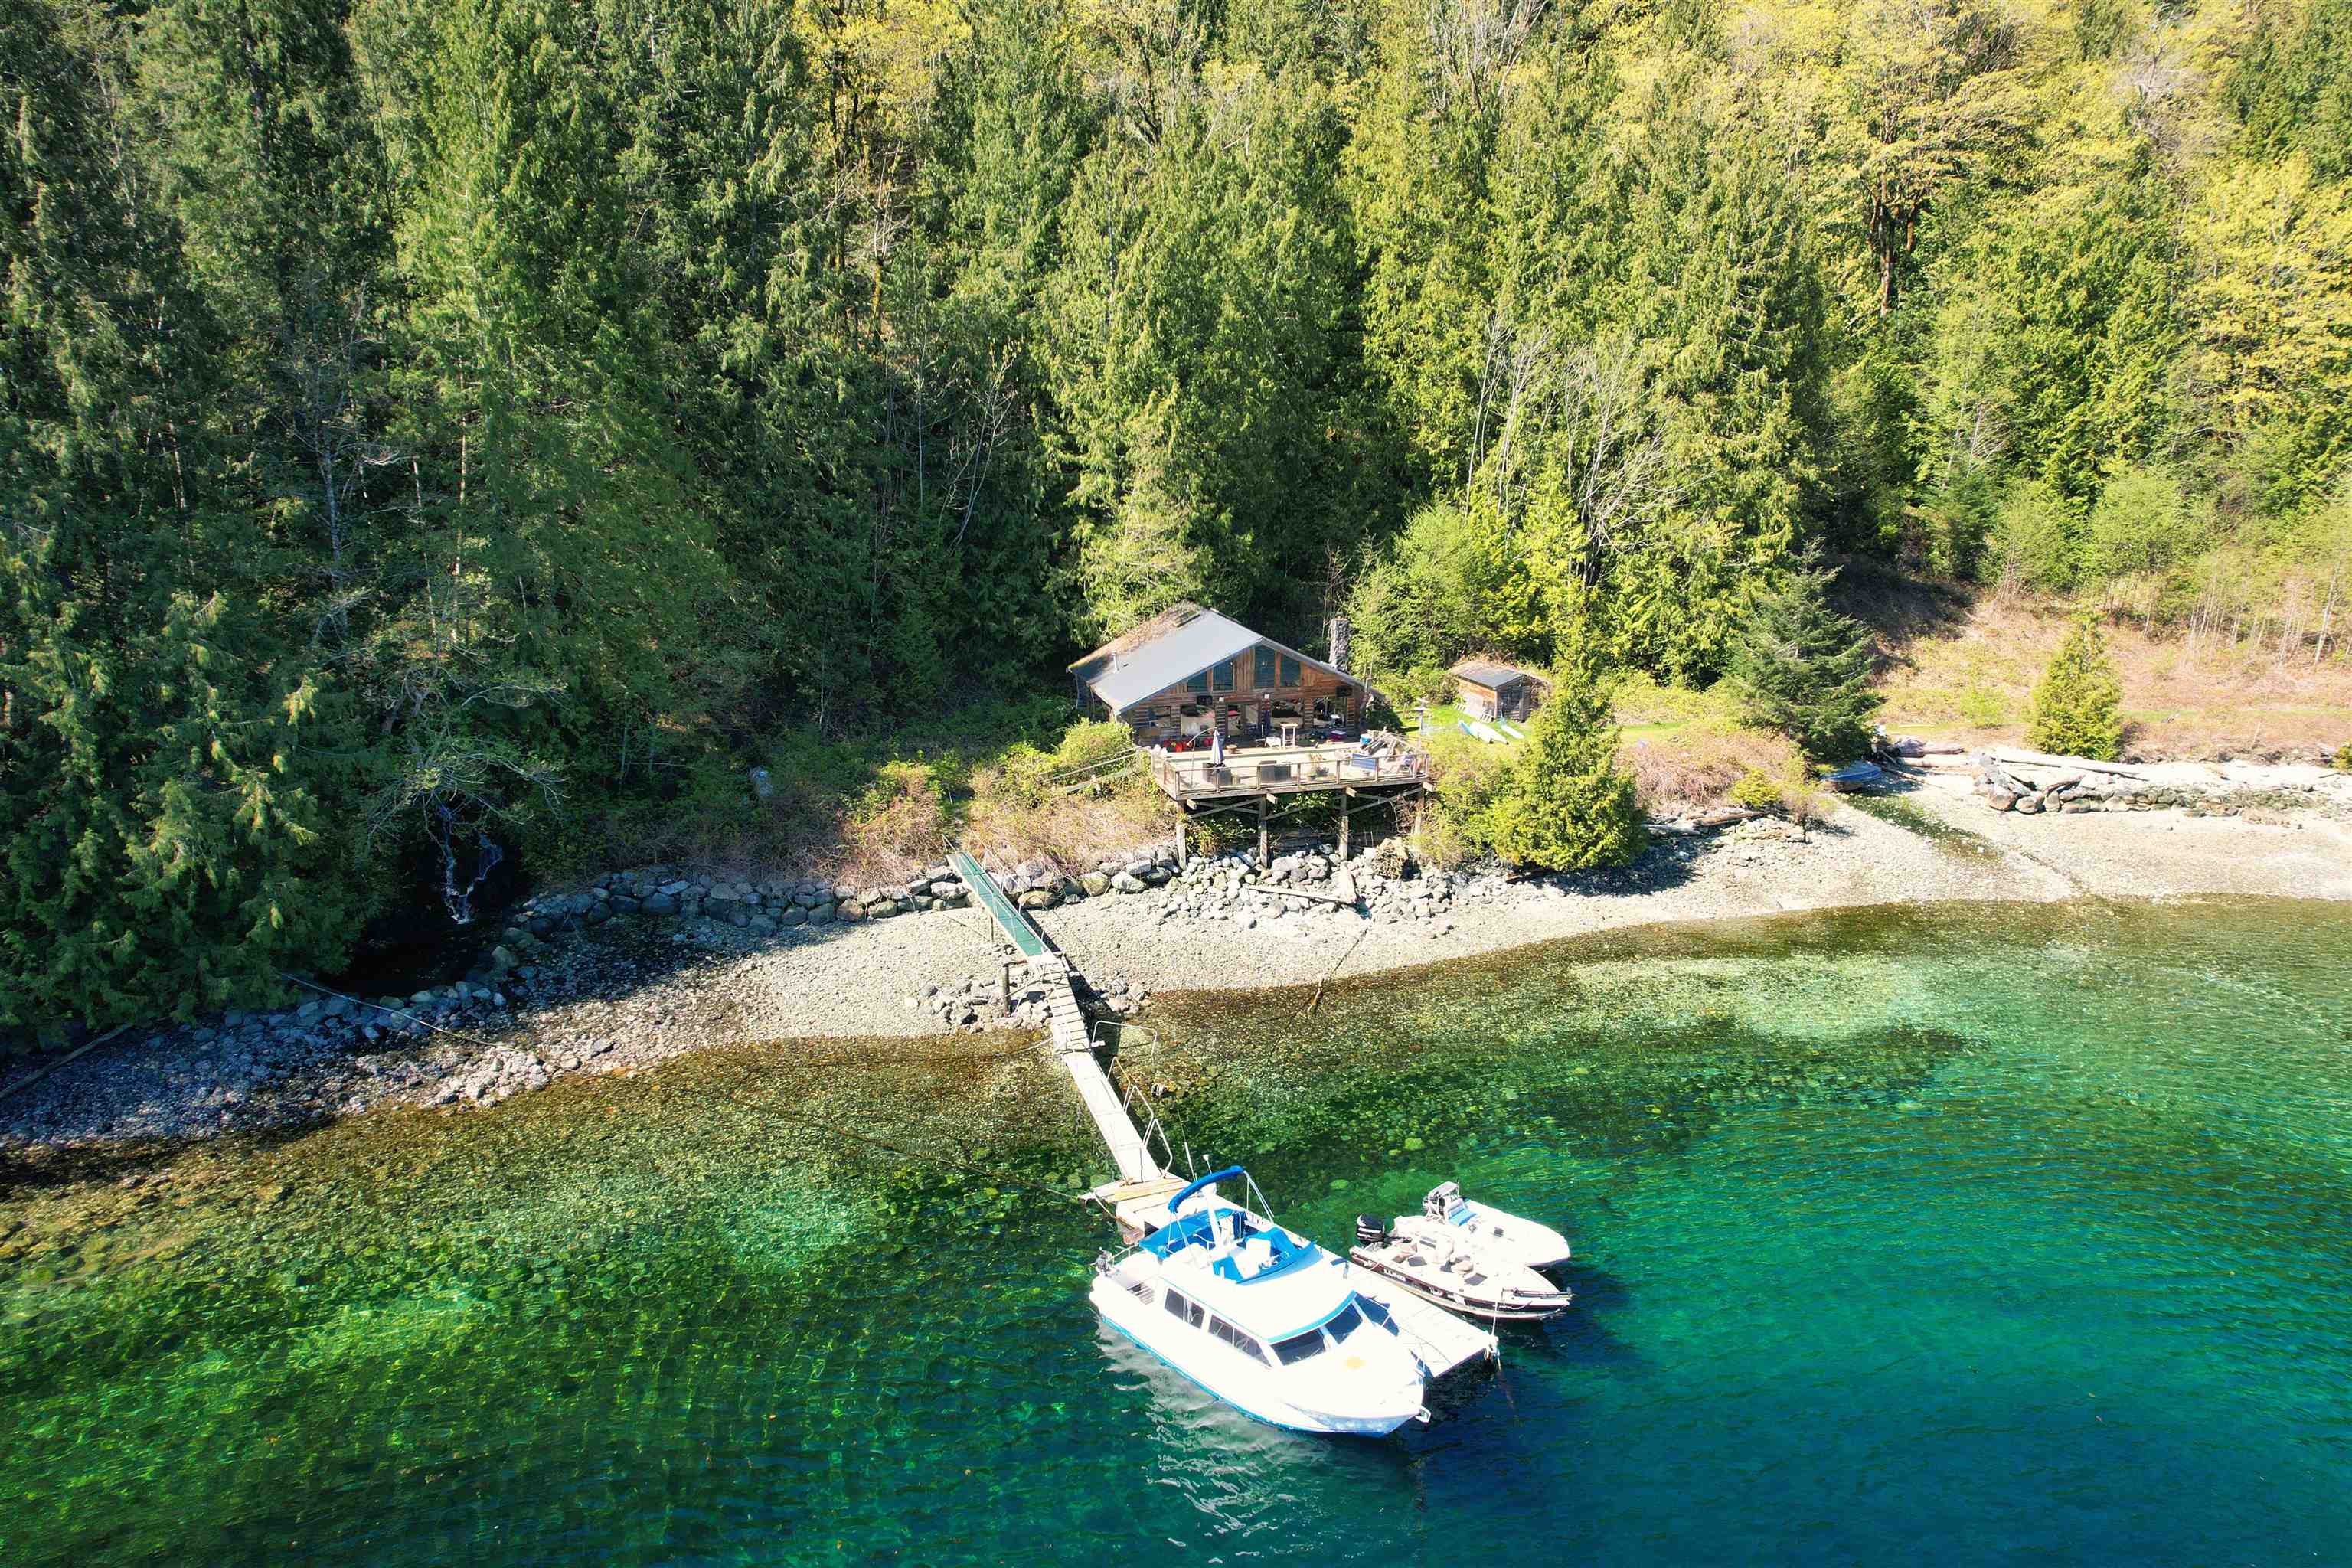 Listing image of DL 4055 E DARK COVE JERVIS ROAD